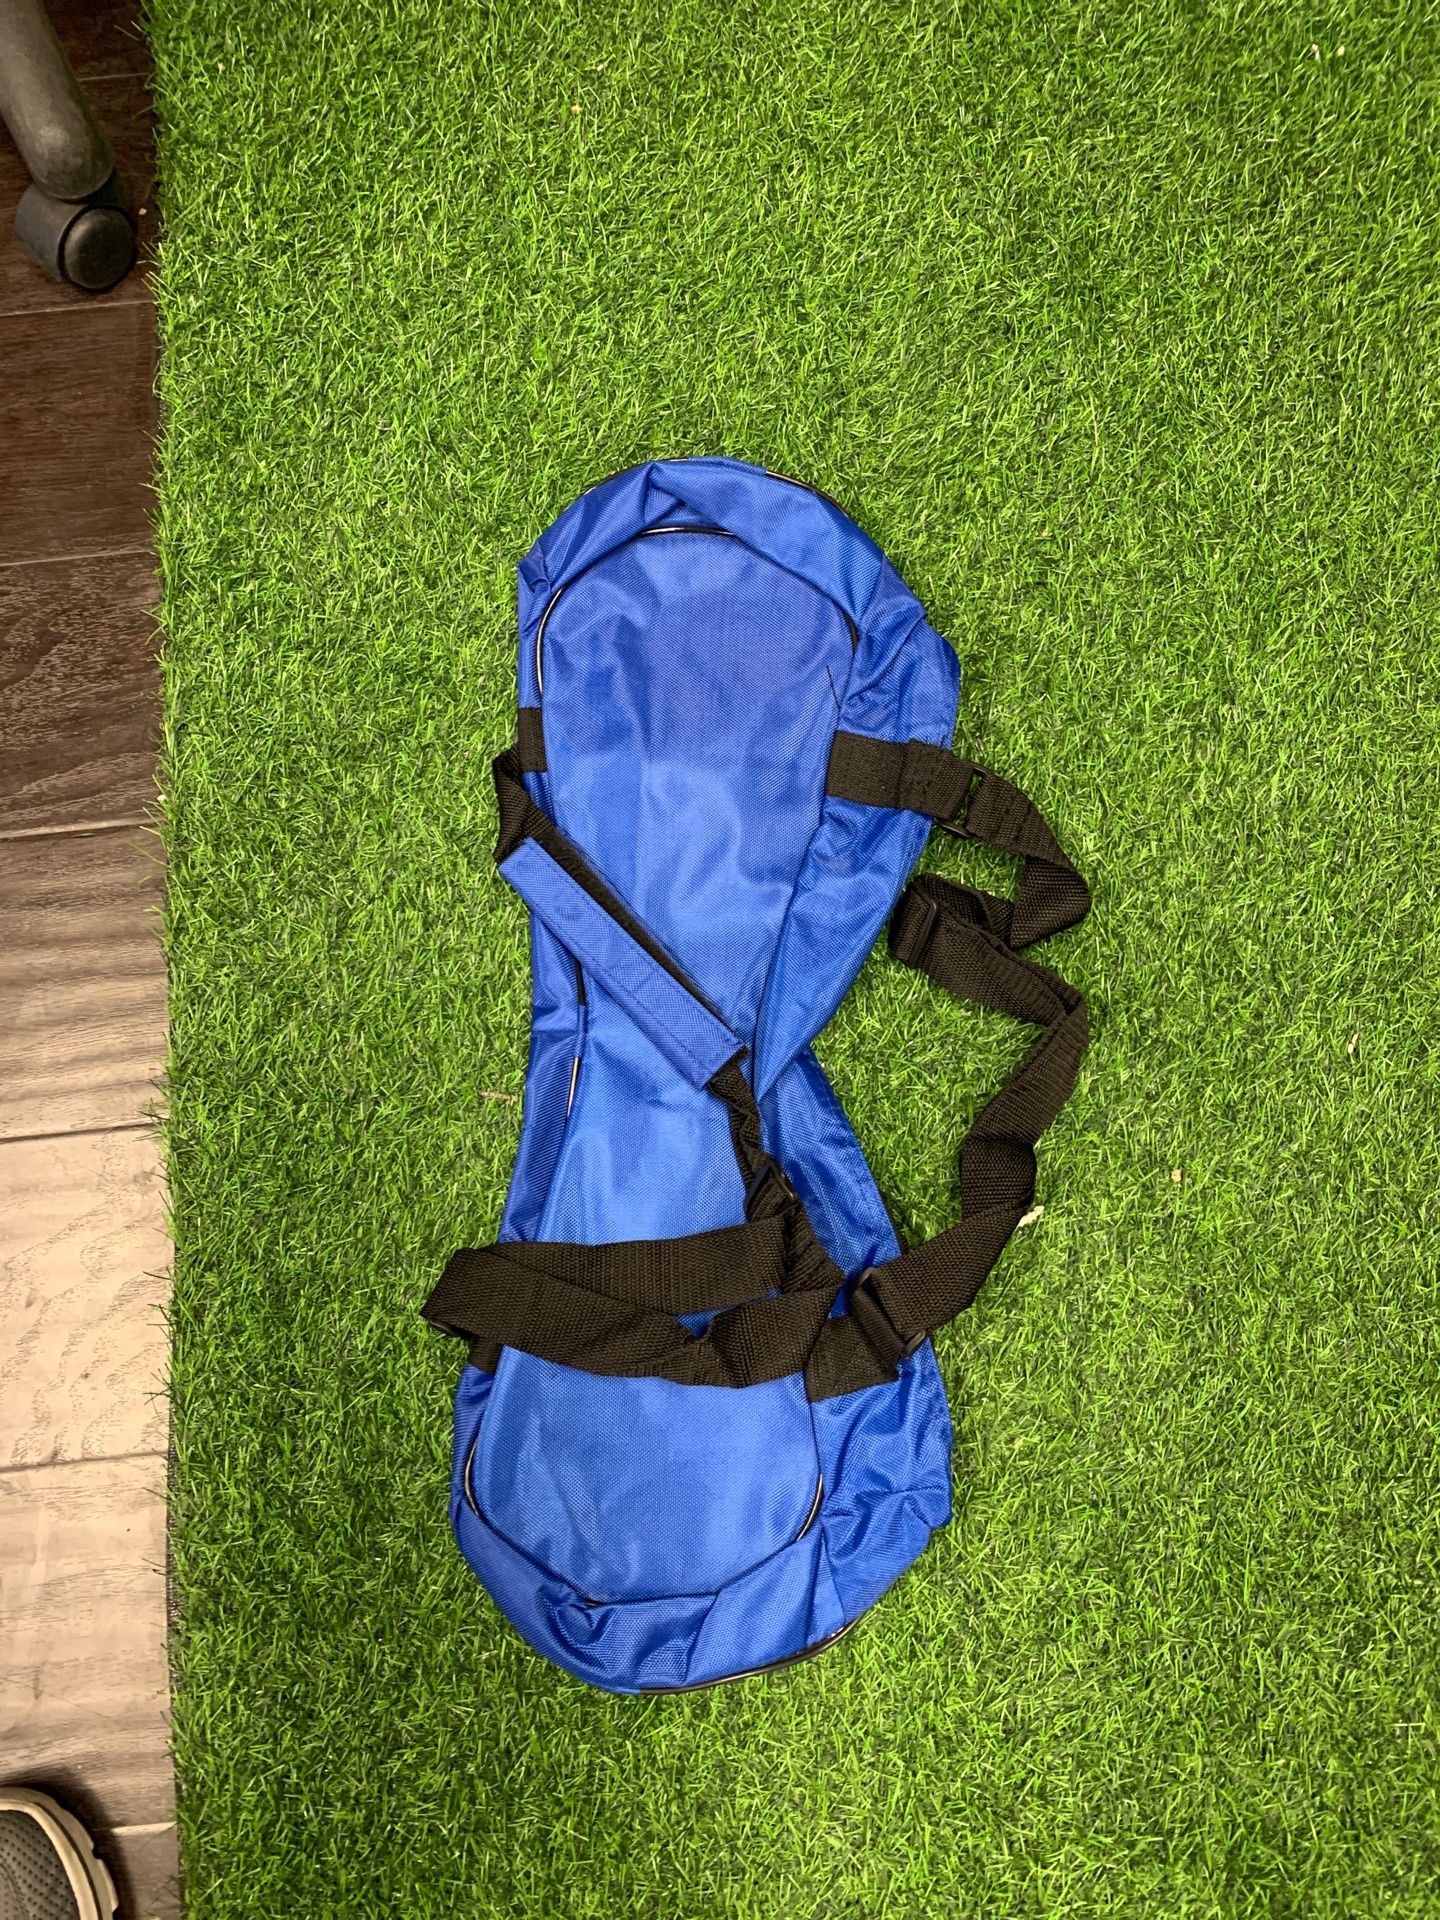 Hoverboard carrying bag new